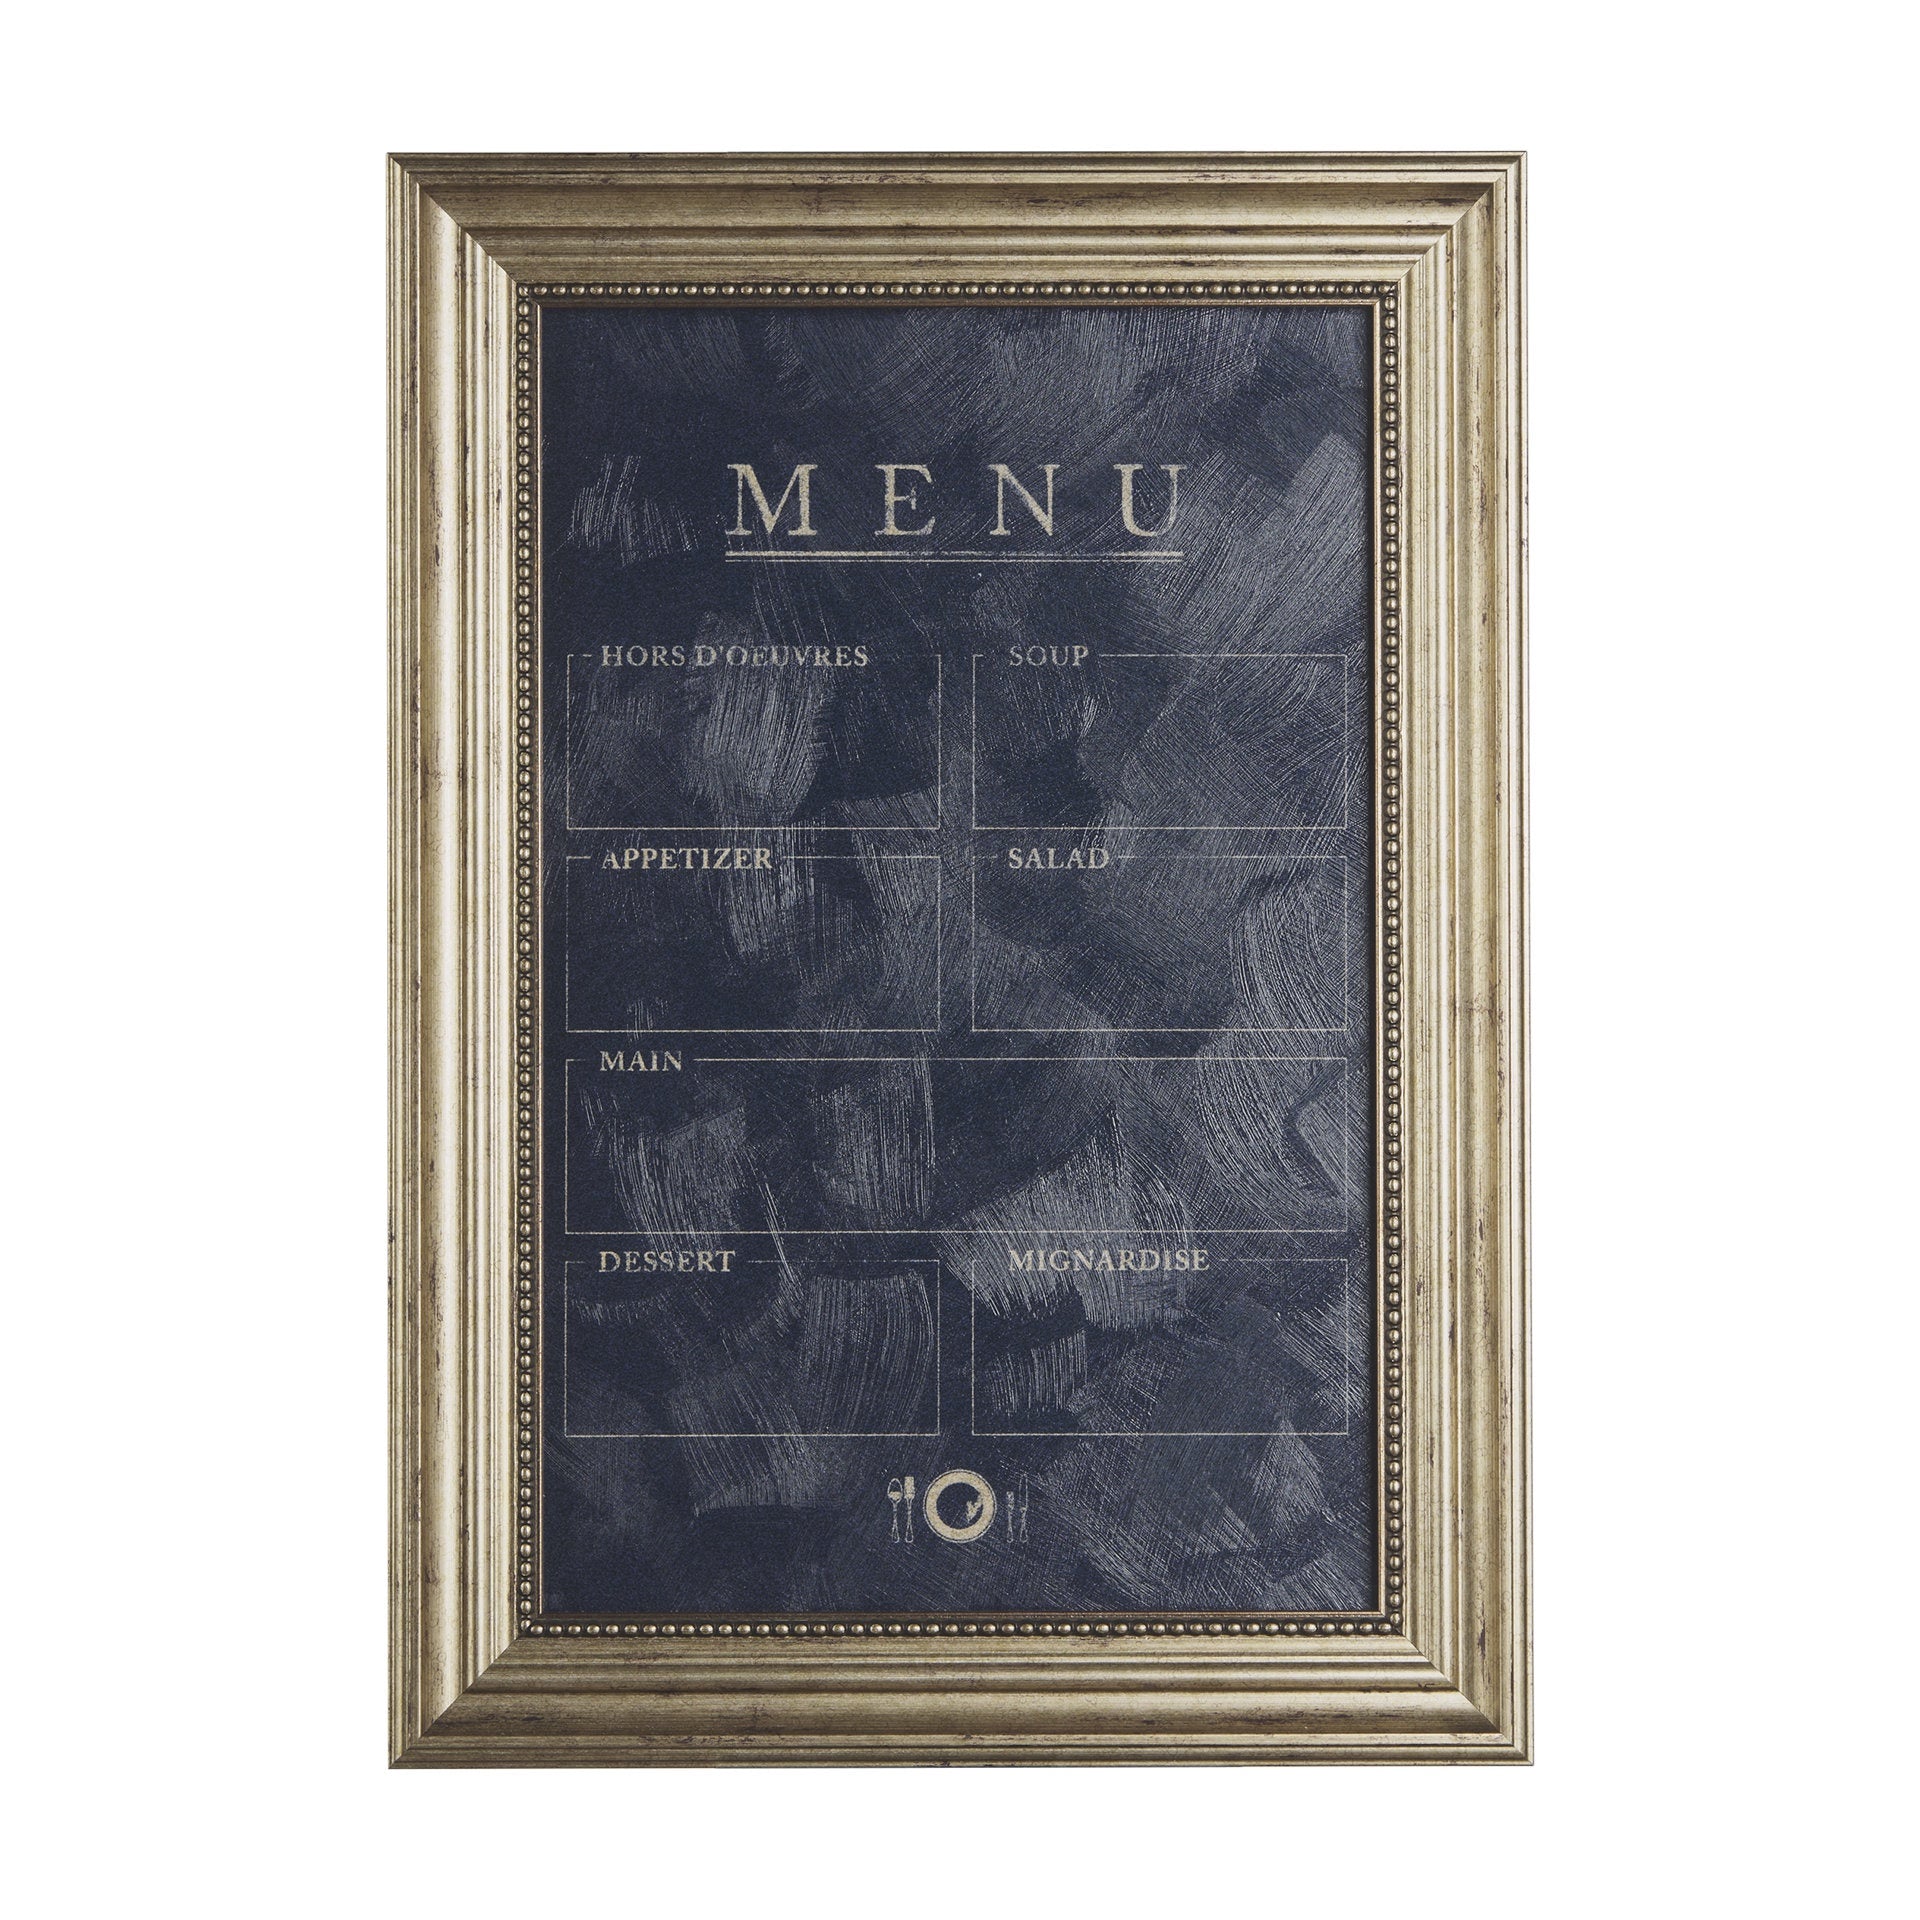 An elegant framed **Mercana Menu Art** with a vintage aesthetic on a textured blue background, featuring sections labeled &quot;Hors d&#39;Oeuvres,&quot; &quot;Soup,&quot; &quot;Appetizer,&quot; &quot;Salad,&quot; &quot;Main,&quot; *Dessert,* and *Mignardise.* Found in a Scottsdale Arizona b